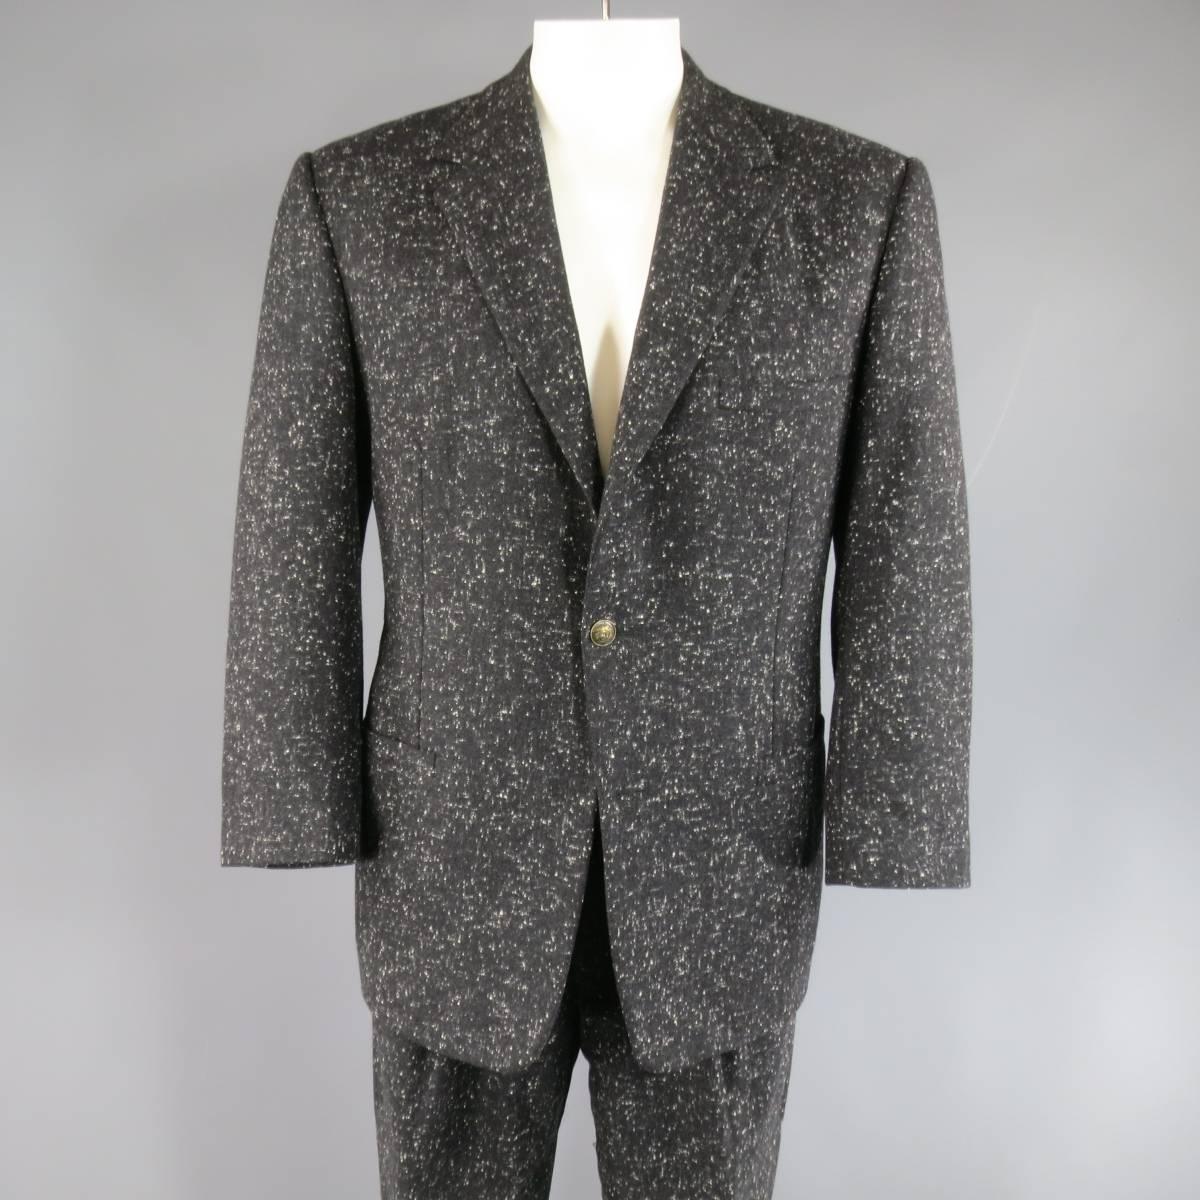 Chic vintage GIANNI VERSACE fall/winter suit comes in a charcoal heather wool with cream spots throughout and includes a three button sport coat with notch lapel, double slit pockets, and dark gold brass Medusa buttons and matching pleated trousers.